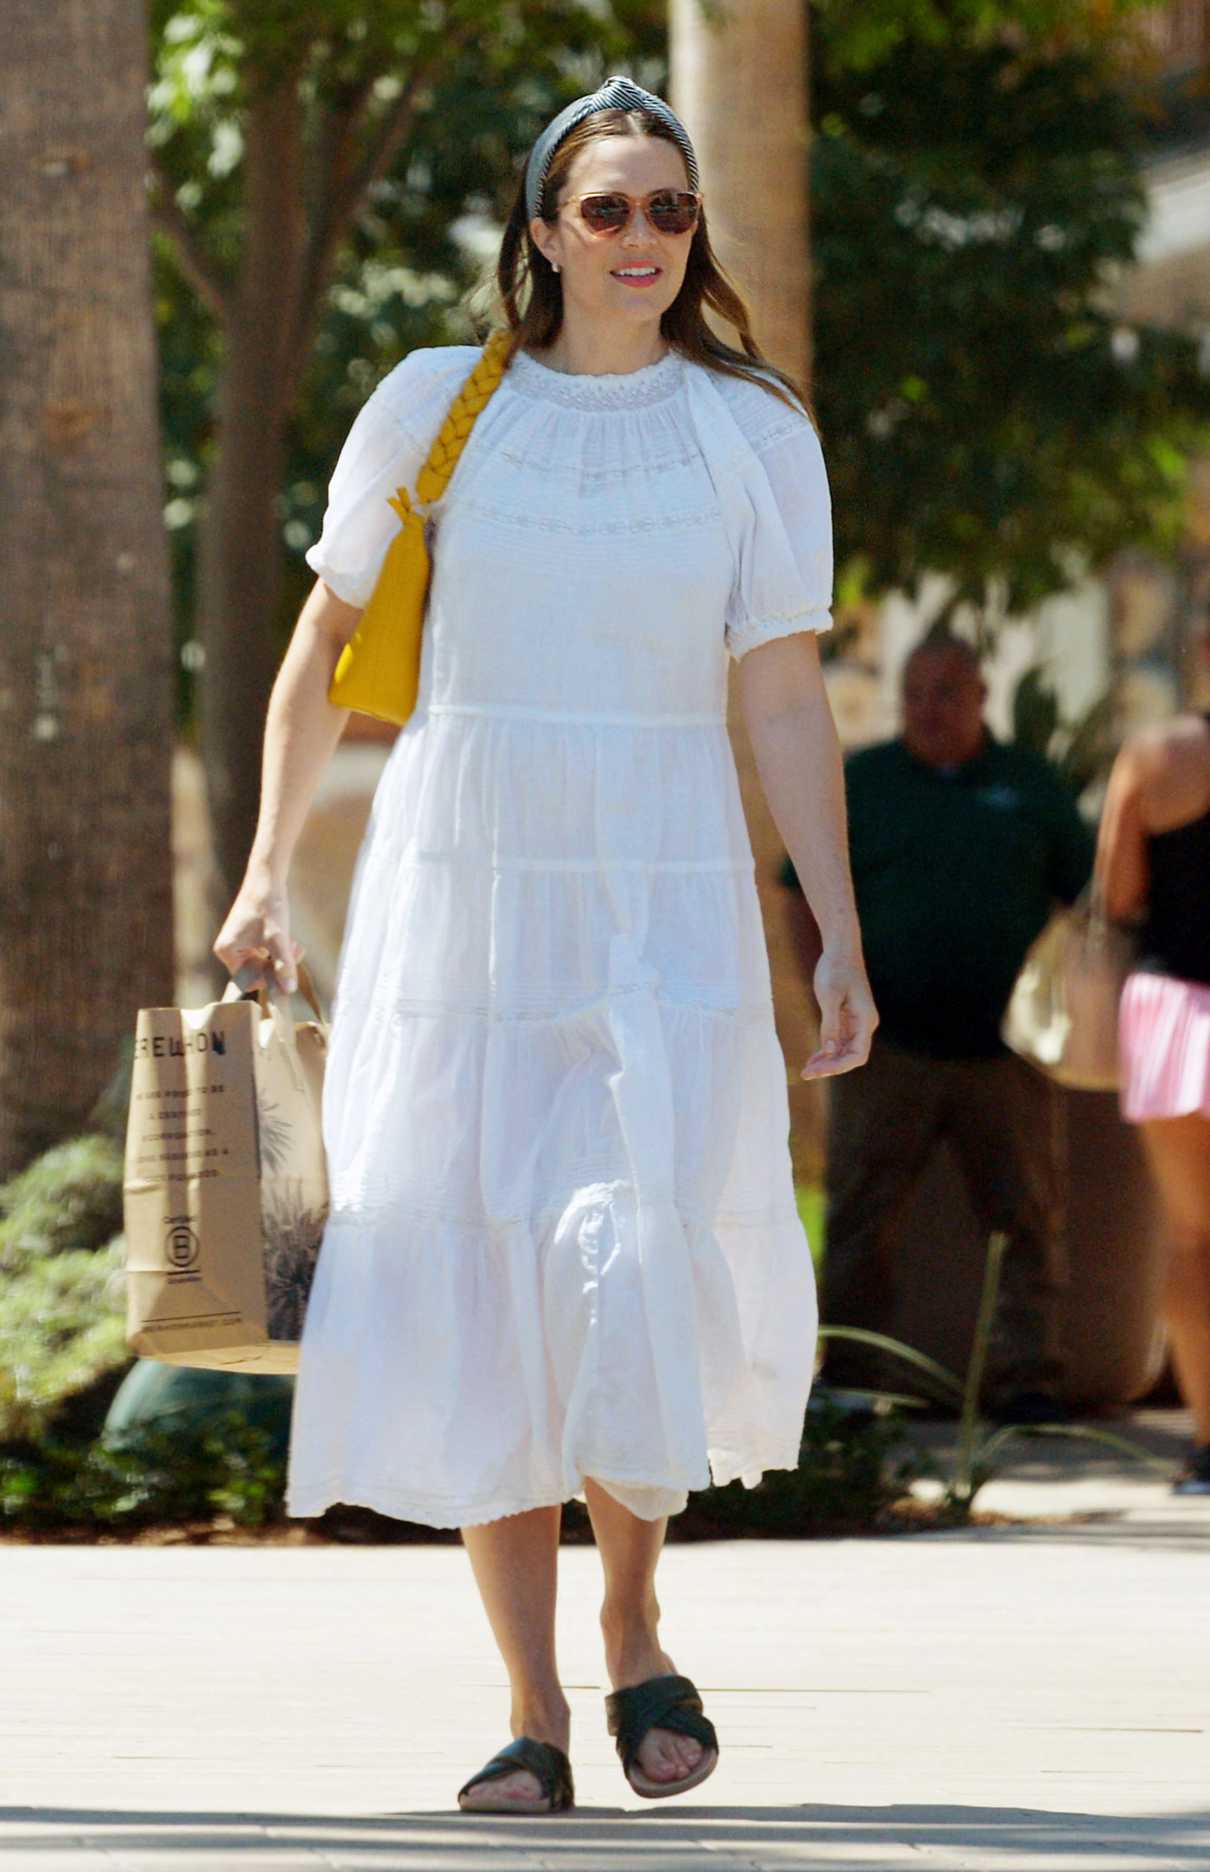 Mandy Moore in a White Dress